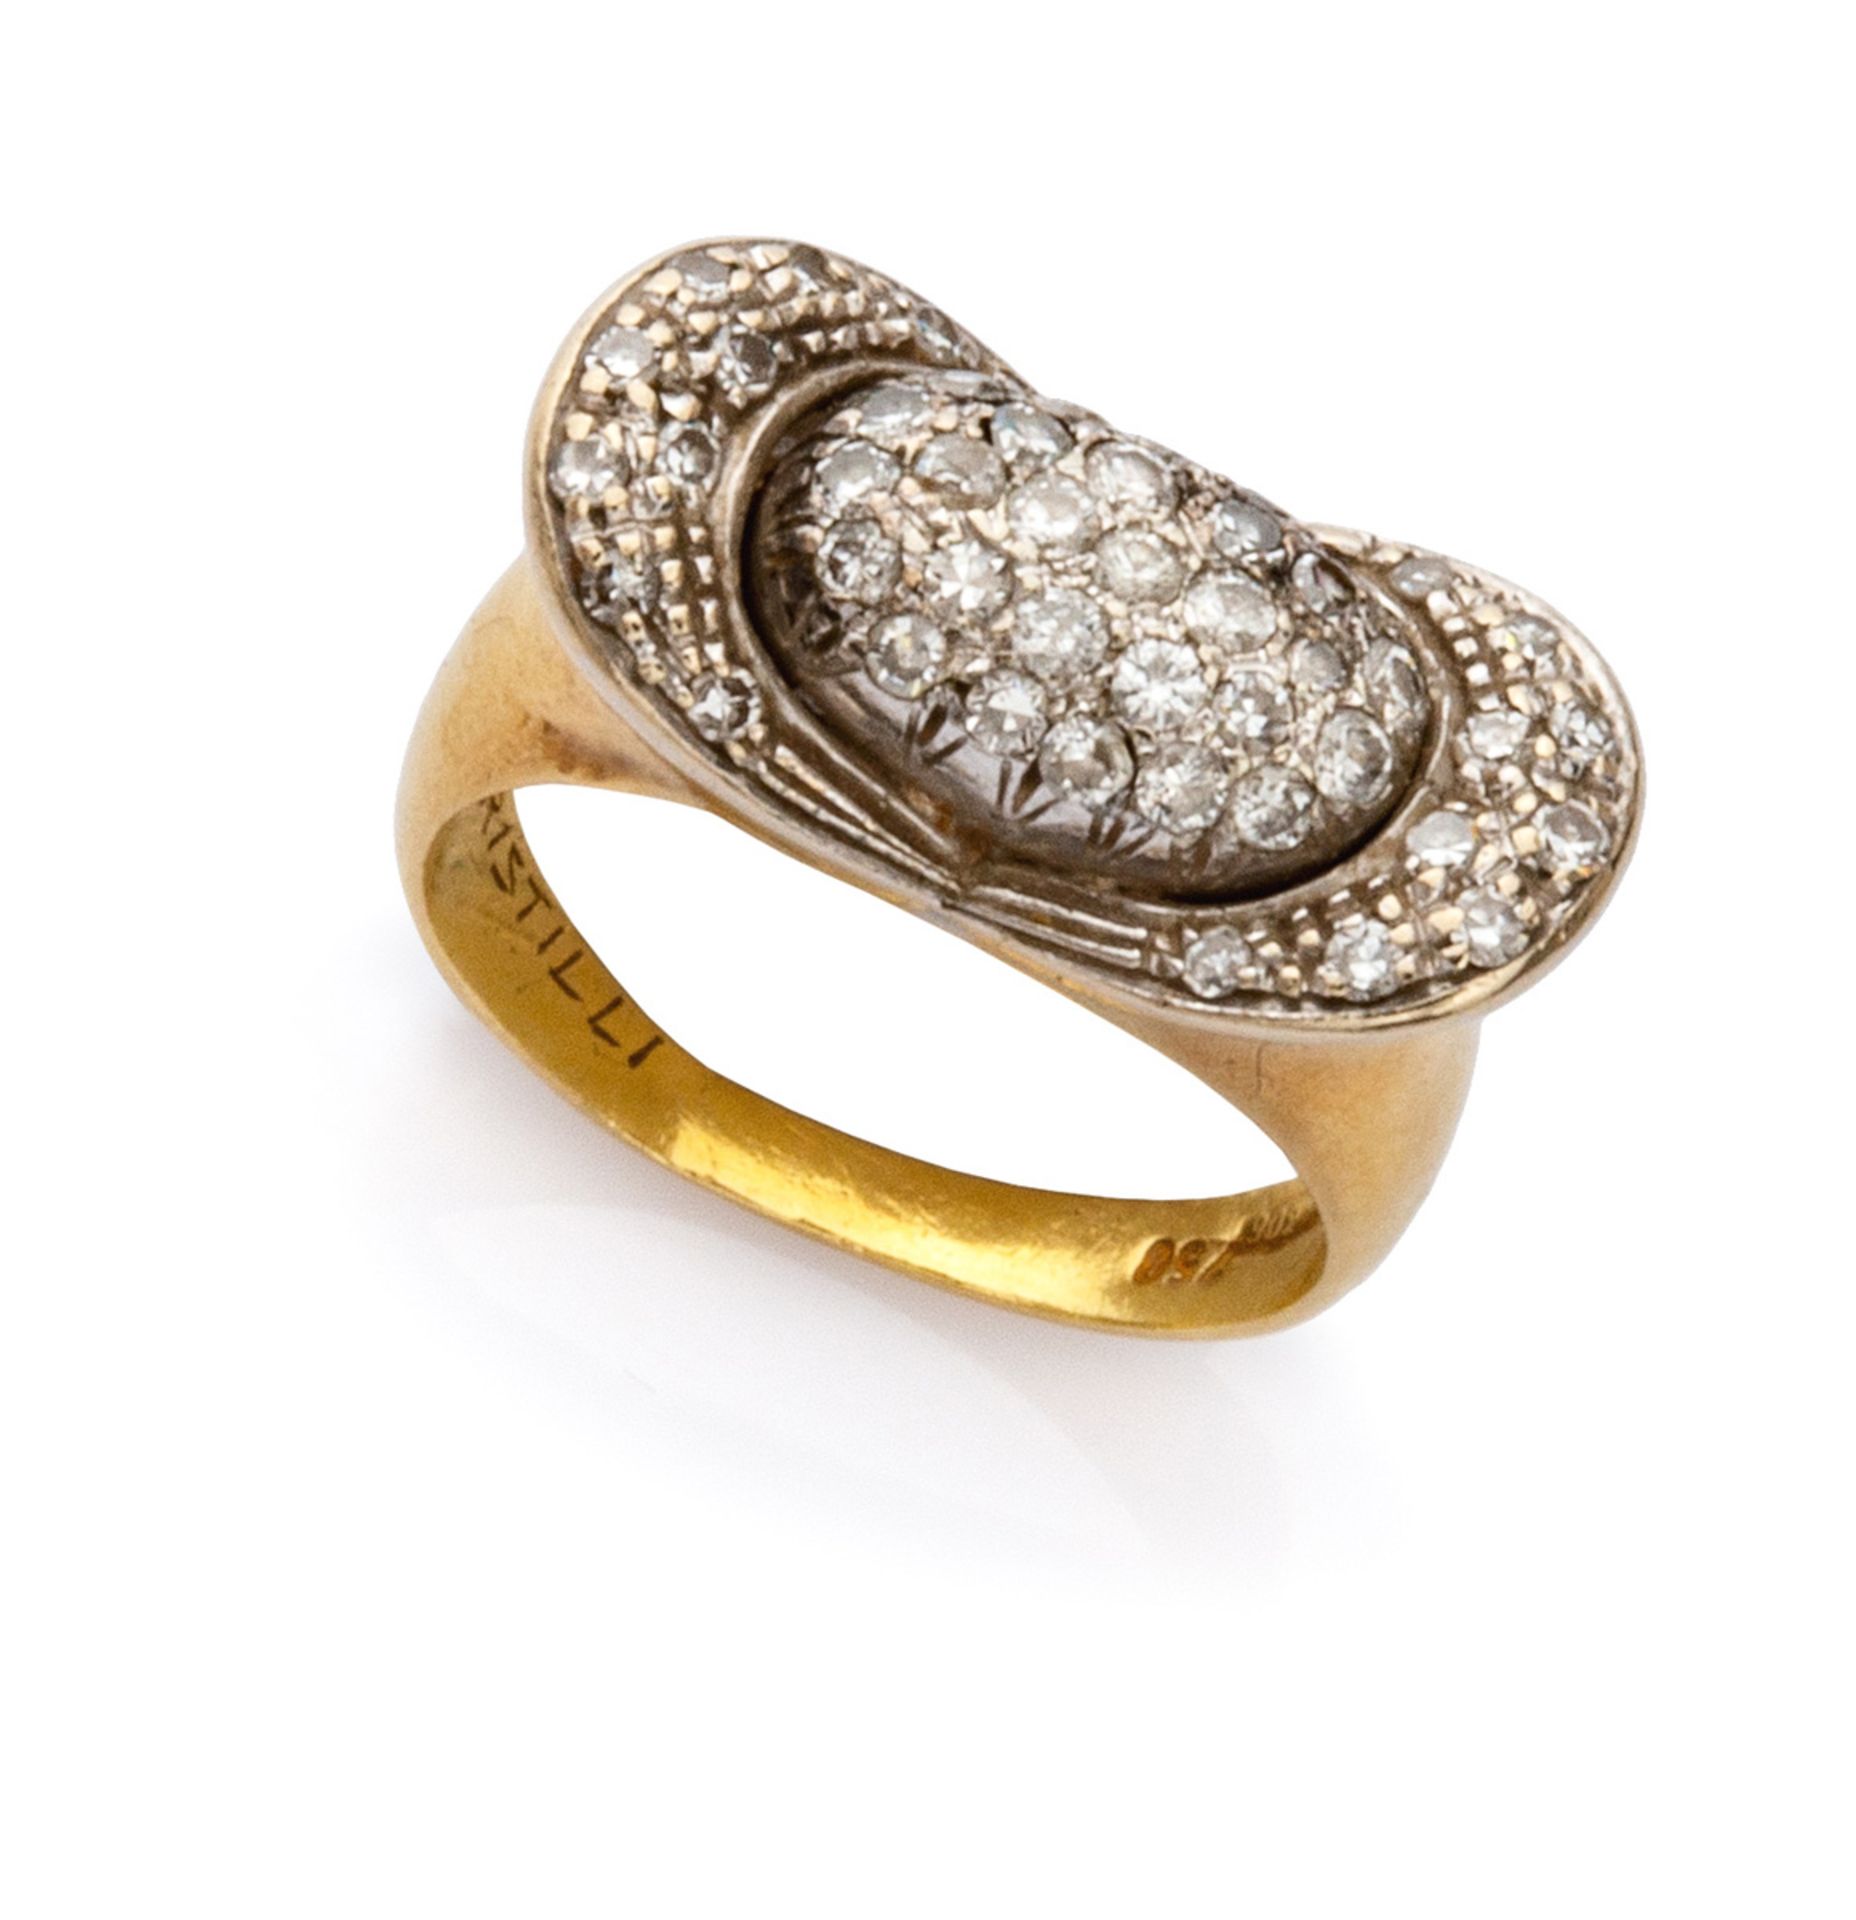 RING in yellow gold 18 kts., dome-shaped studded with diamonds. Diamonds ct. 0.50 ca., total